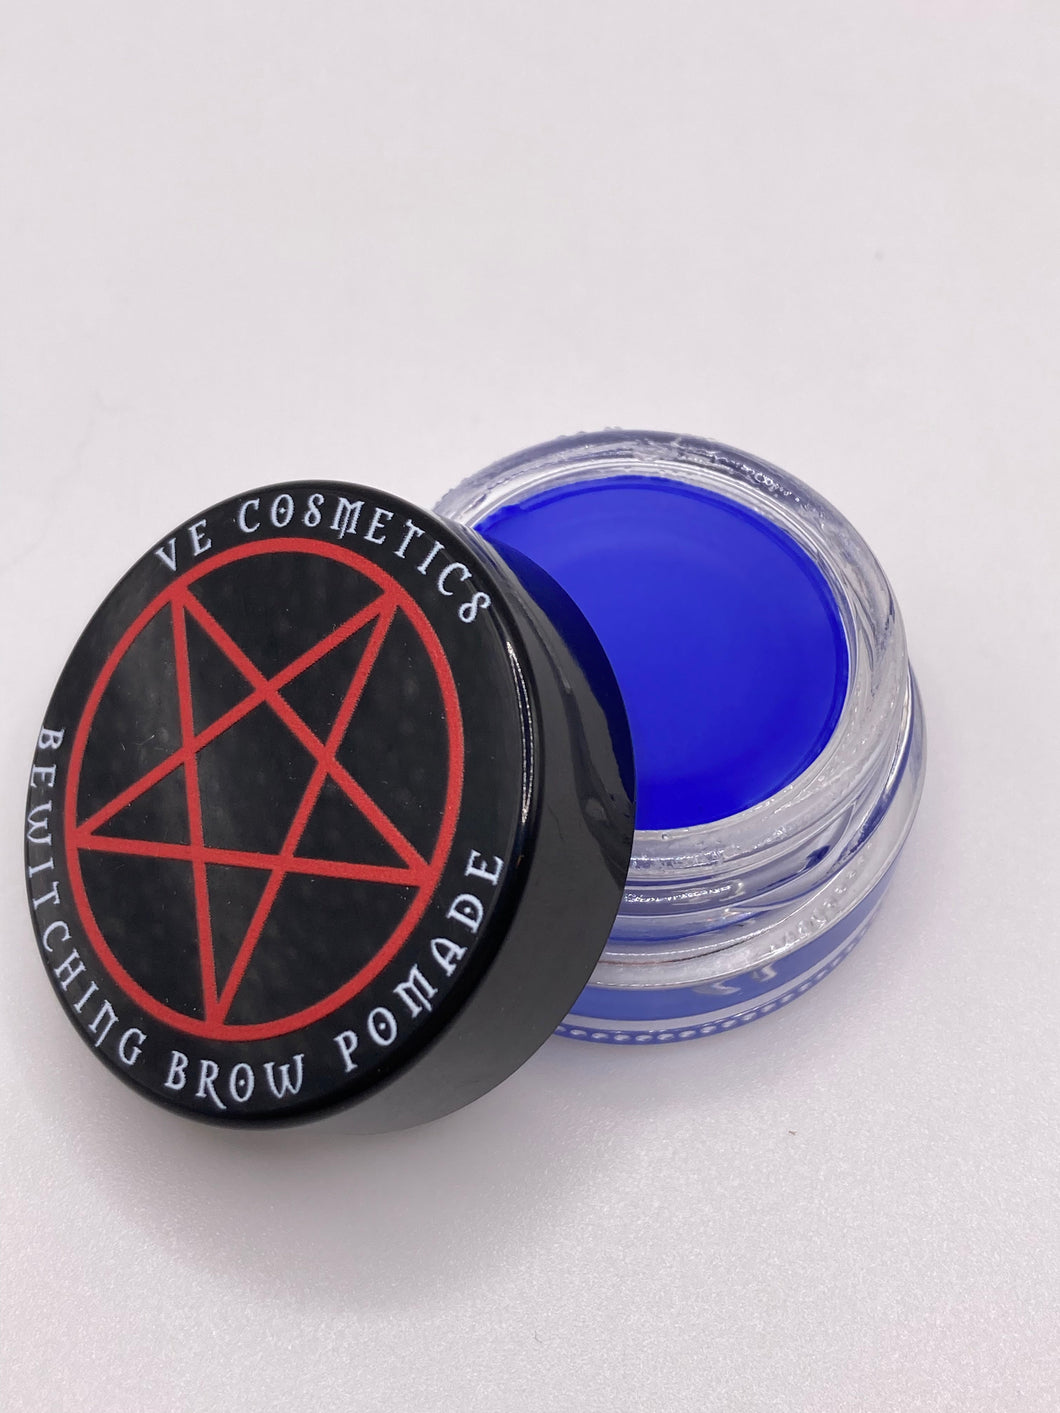 Waterproof Bewitching Brow Pomade - Brights - VE CosmeticsEyebrow